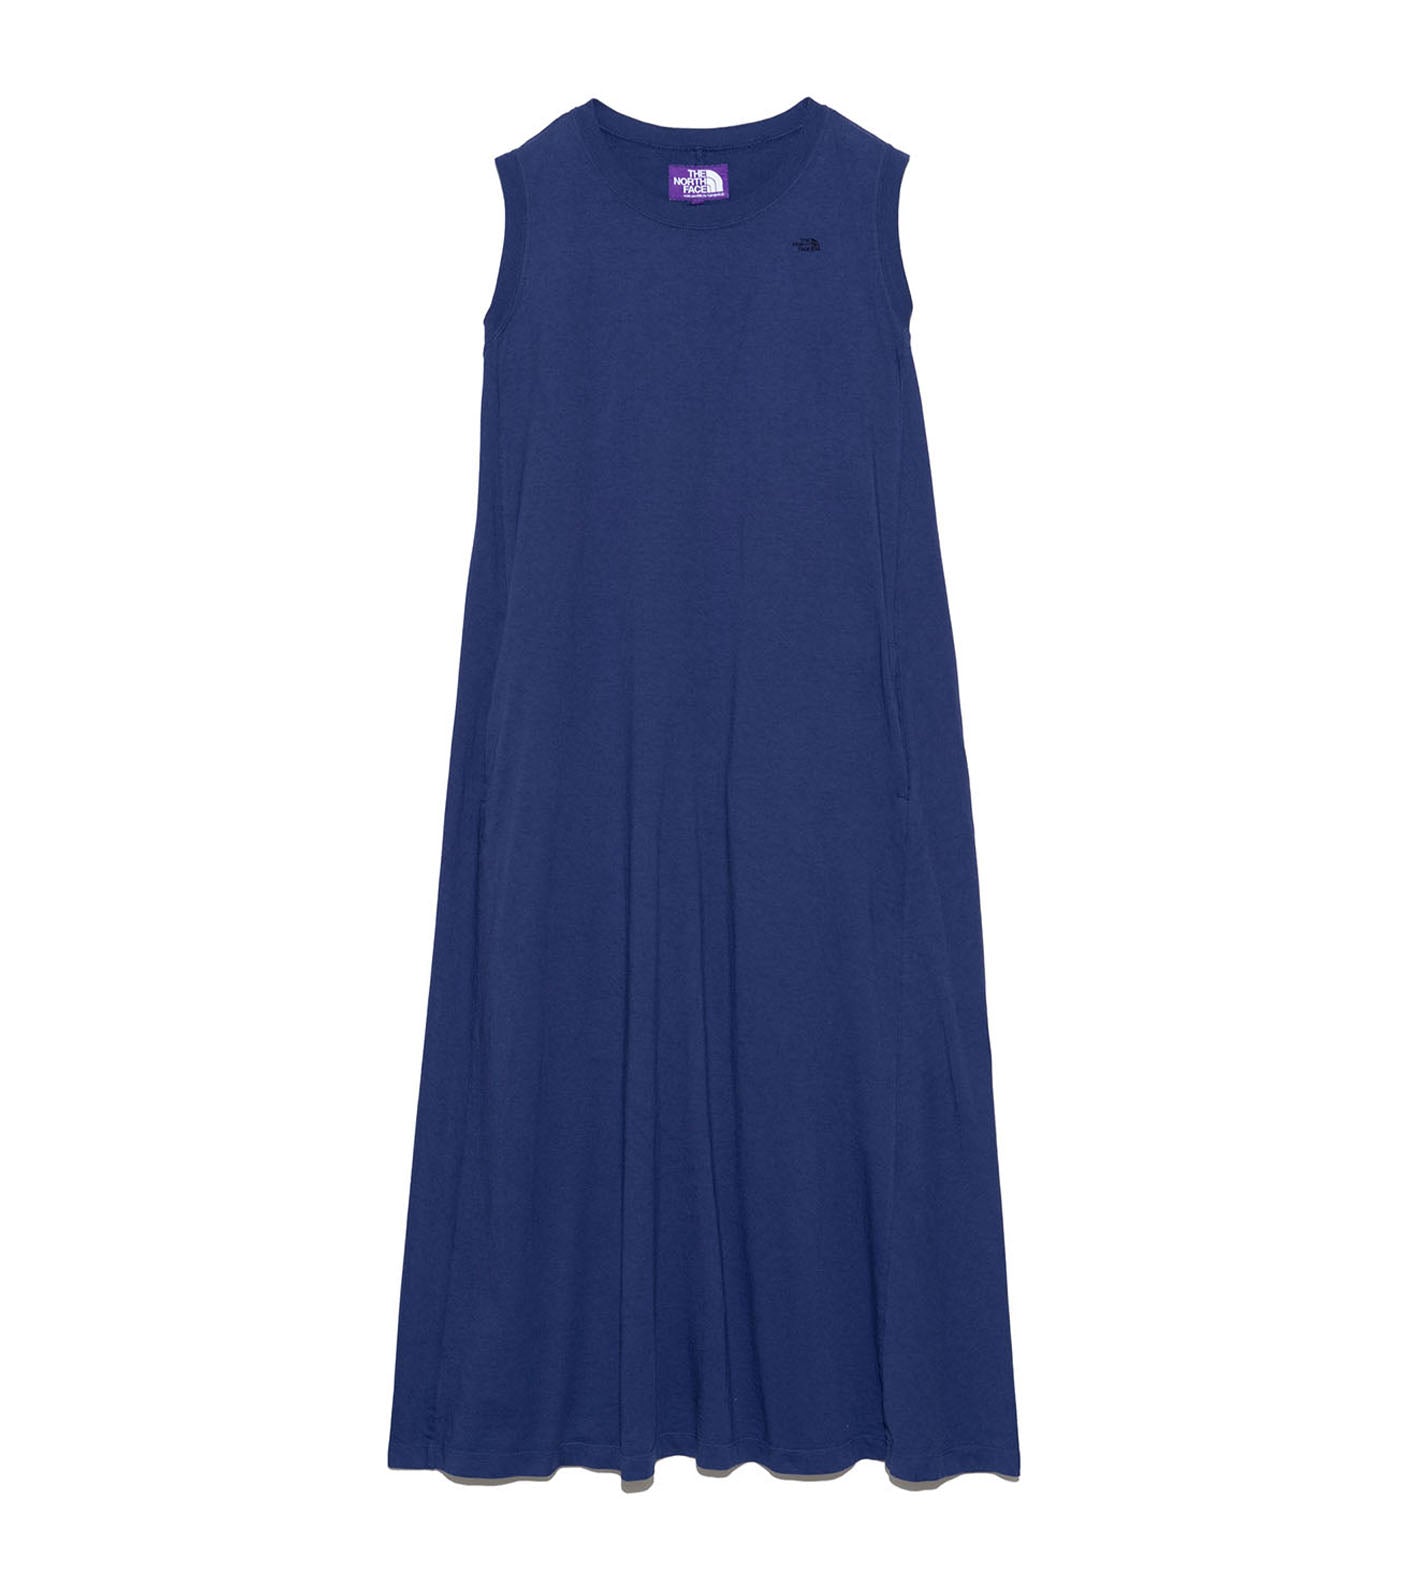 THE NORTH FACE PURPLE LABEL 5.5oz Sleeveless Flared Dress